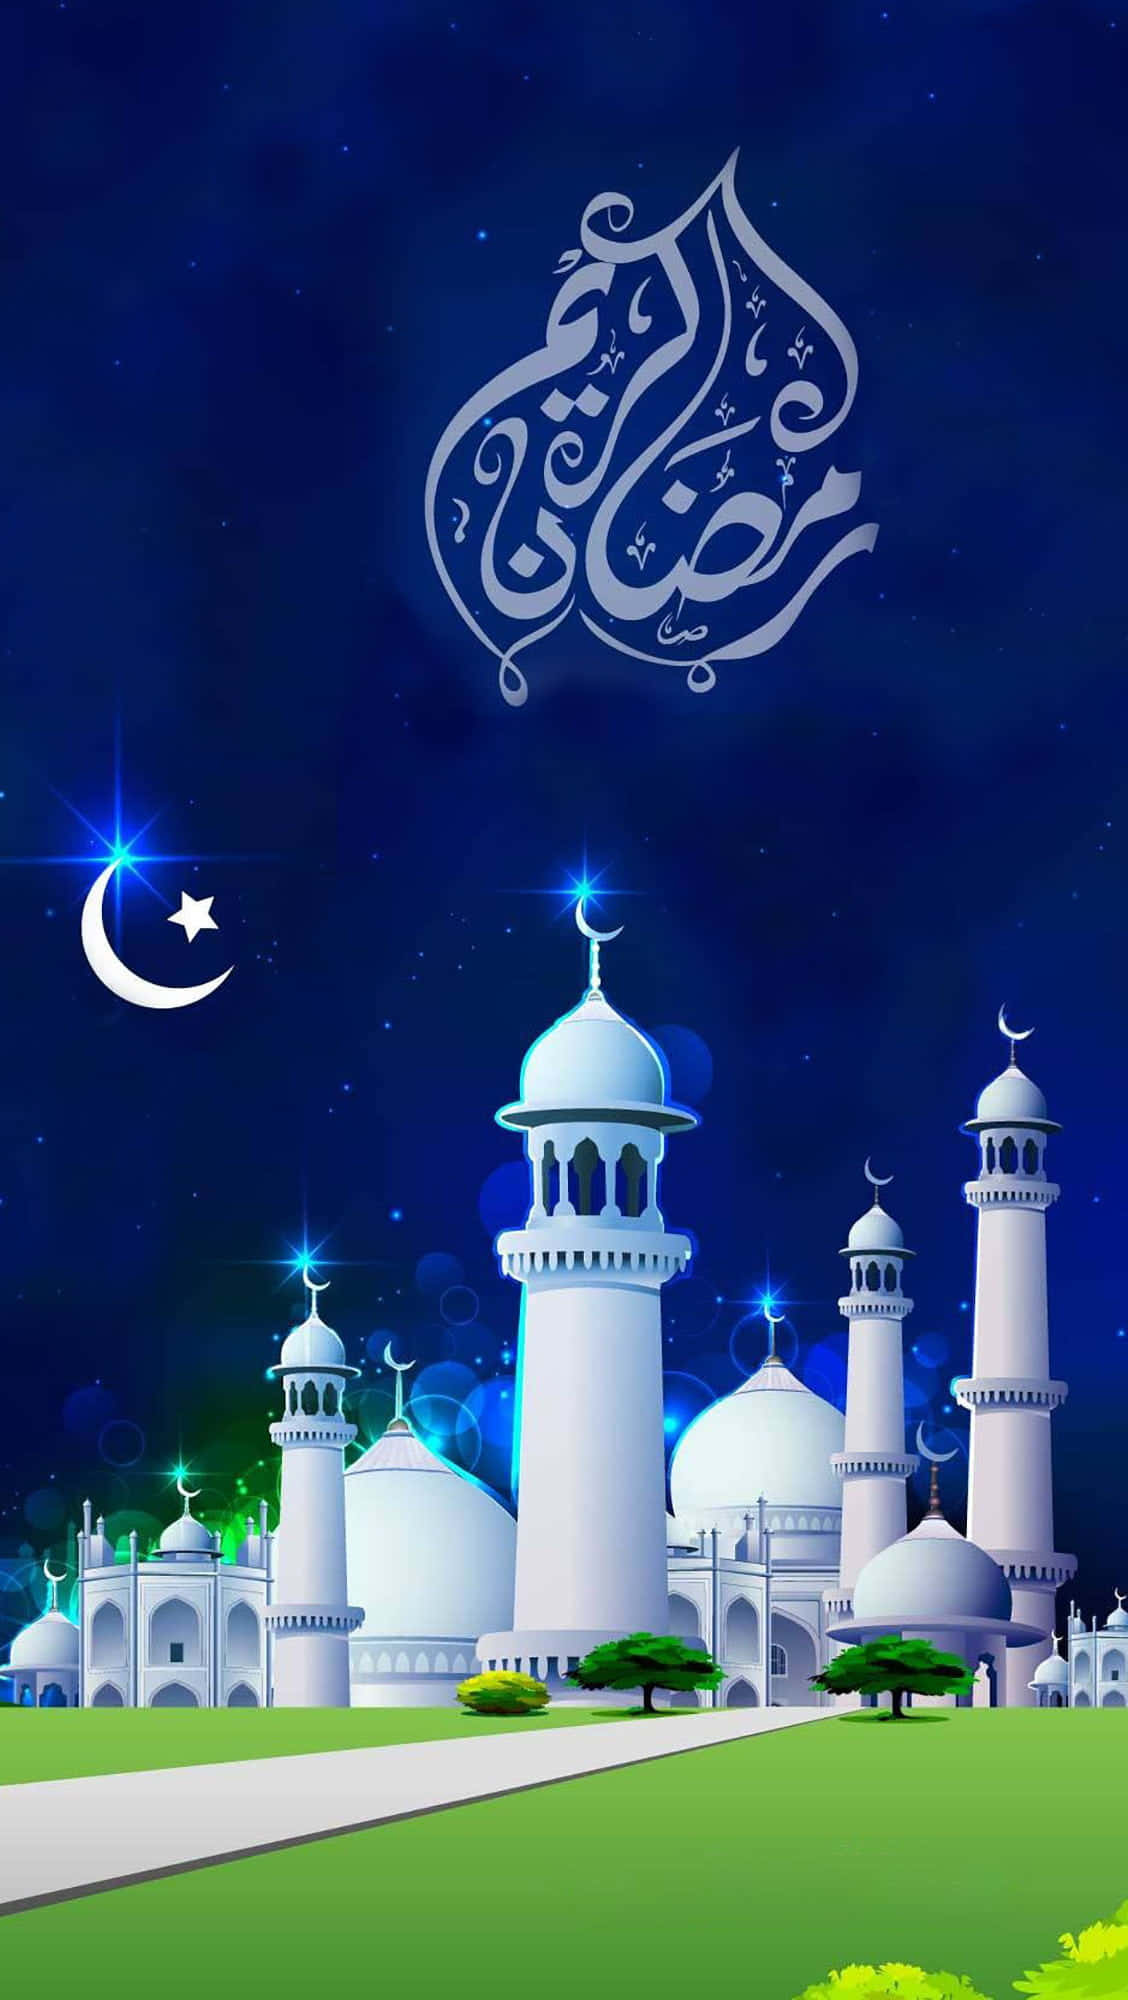 A Mosque With A Crescent Moon And Stars